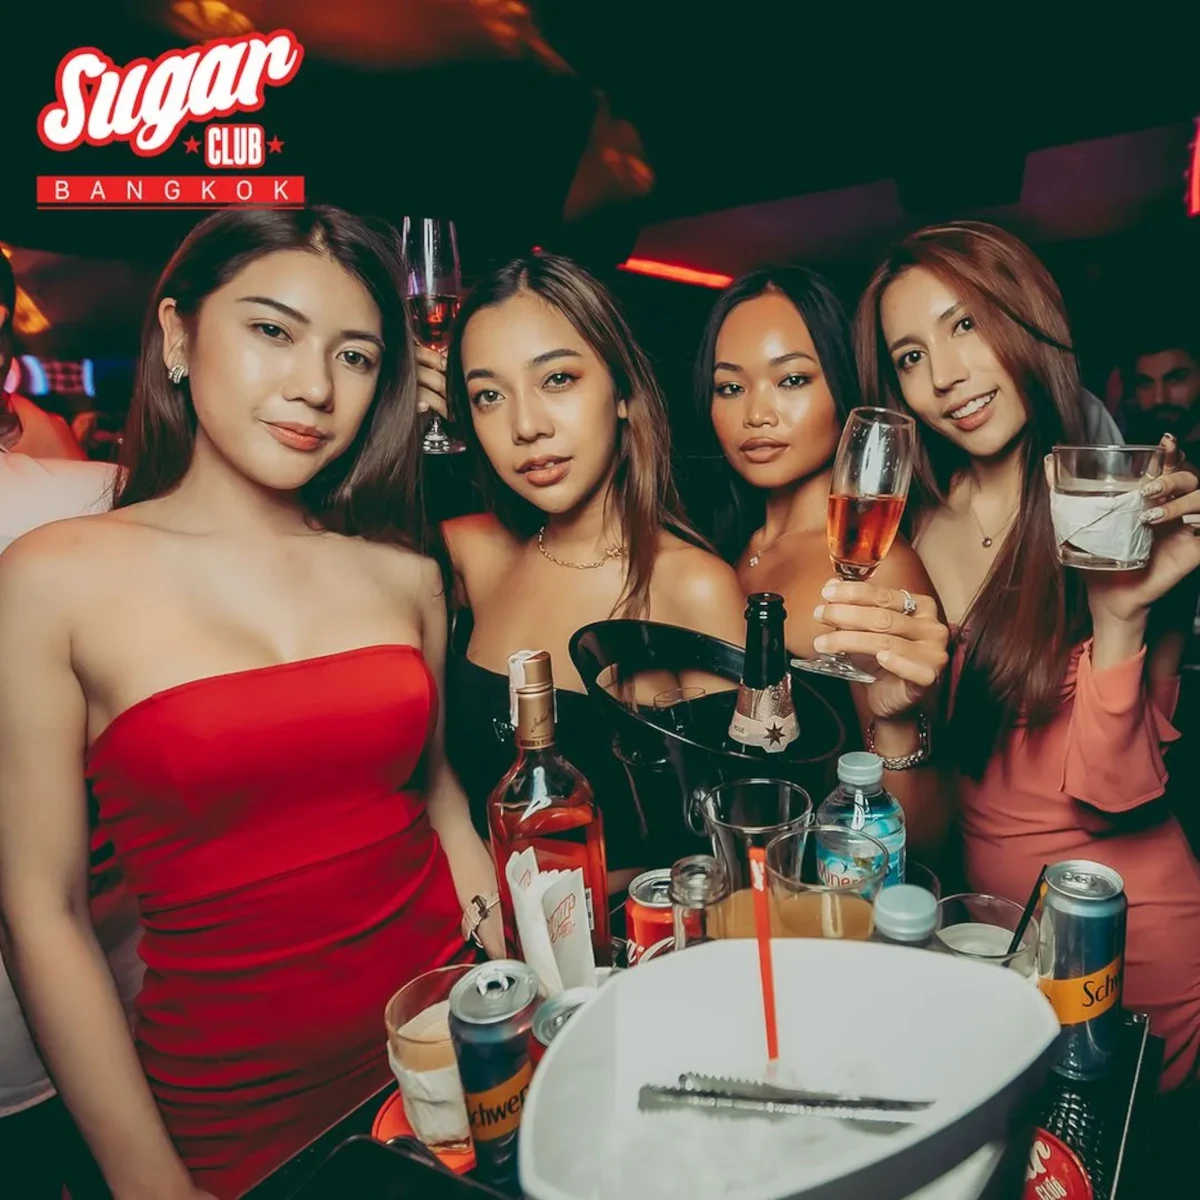 A lively group of gorgeous single ladies enjoying a night out at Sugar Club.